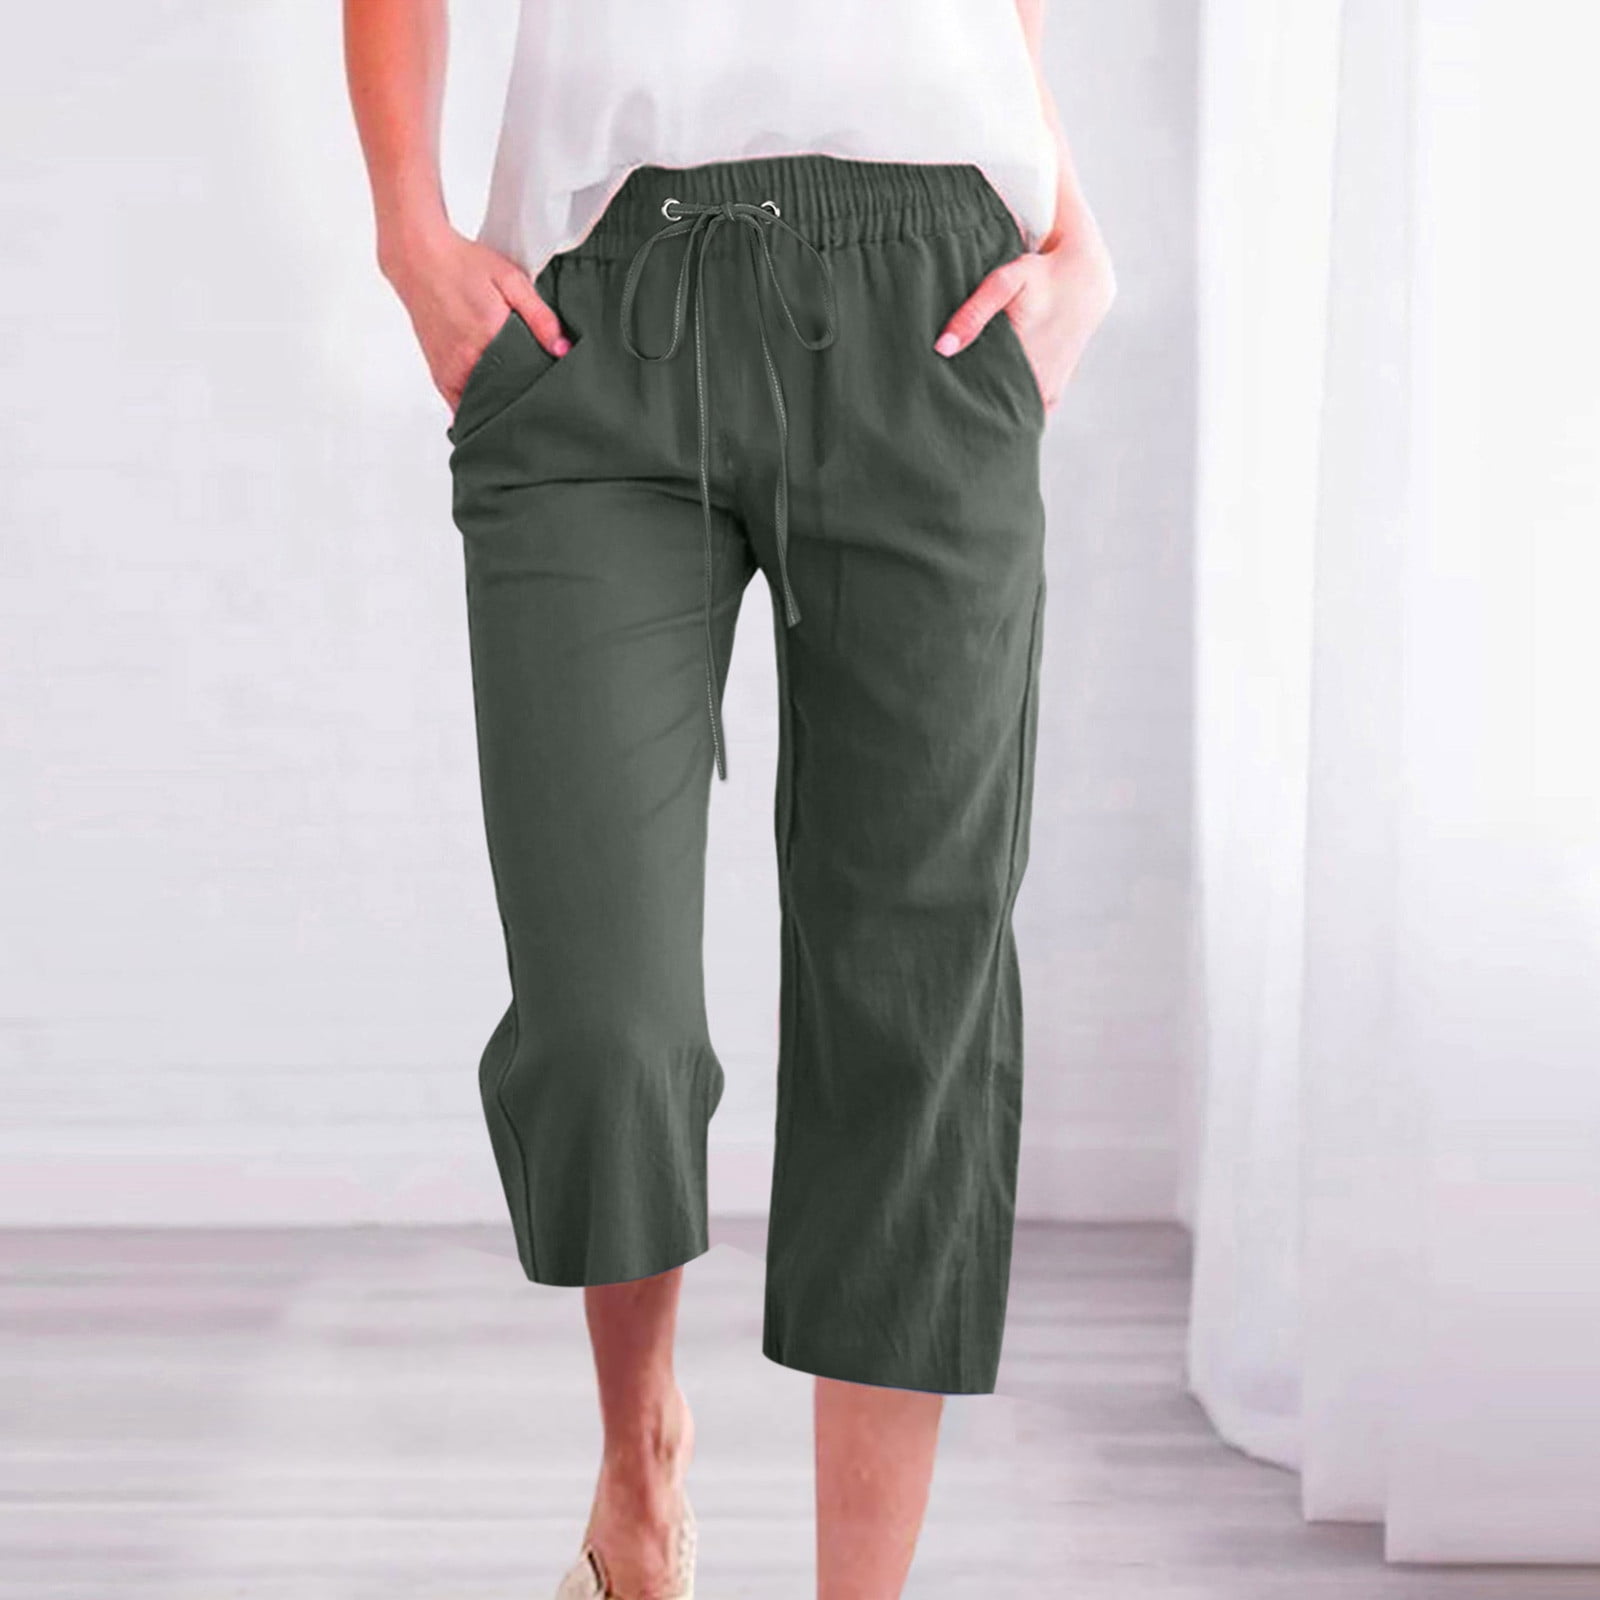 Wide Leg Cropped Pants for Women High Waist Cotton Trousers Lounge Yoga ...